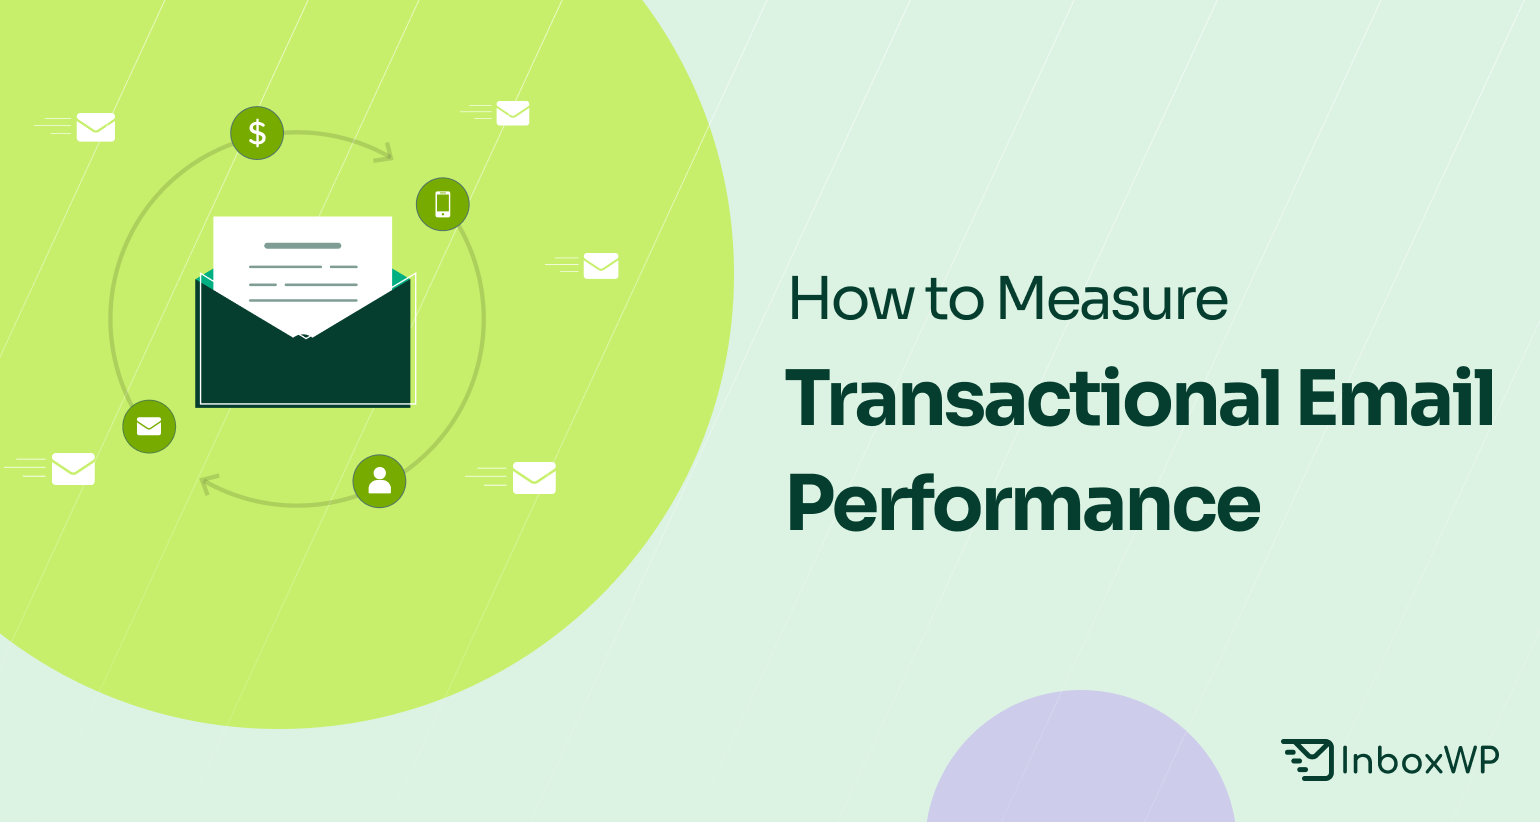 How to Measure Transactional Email Performance